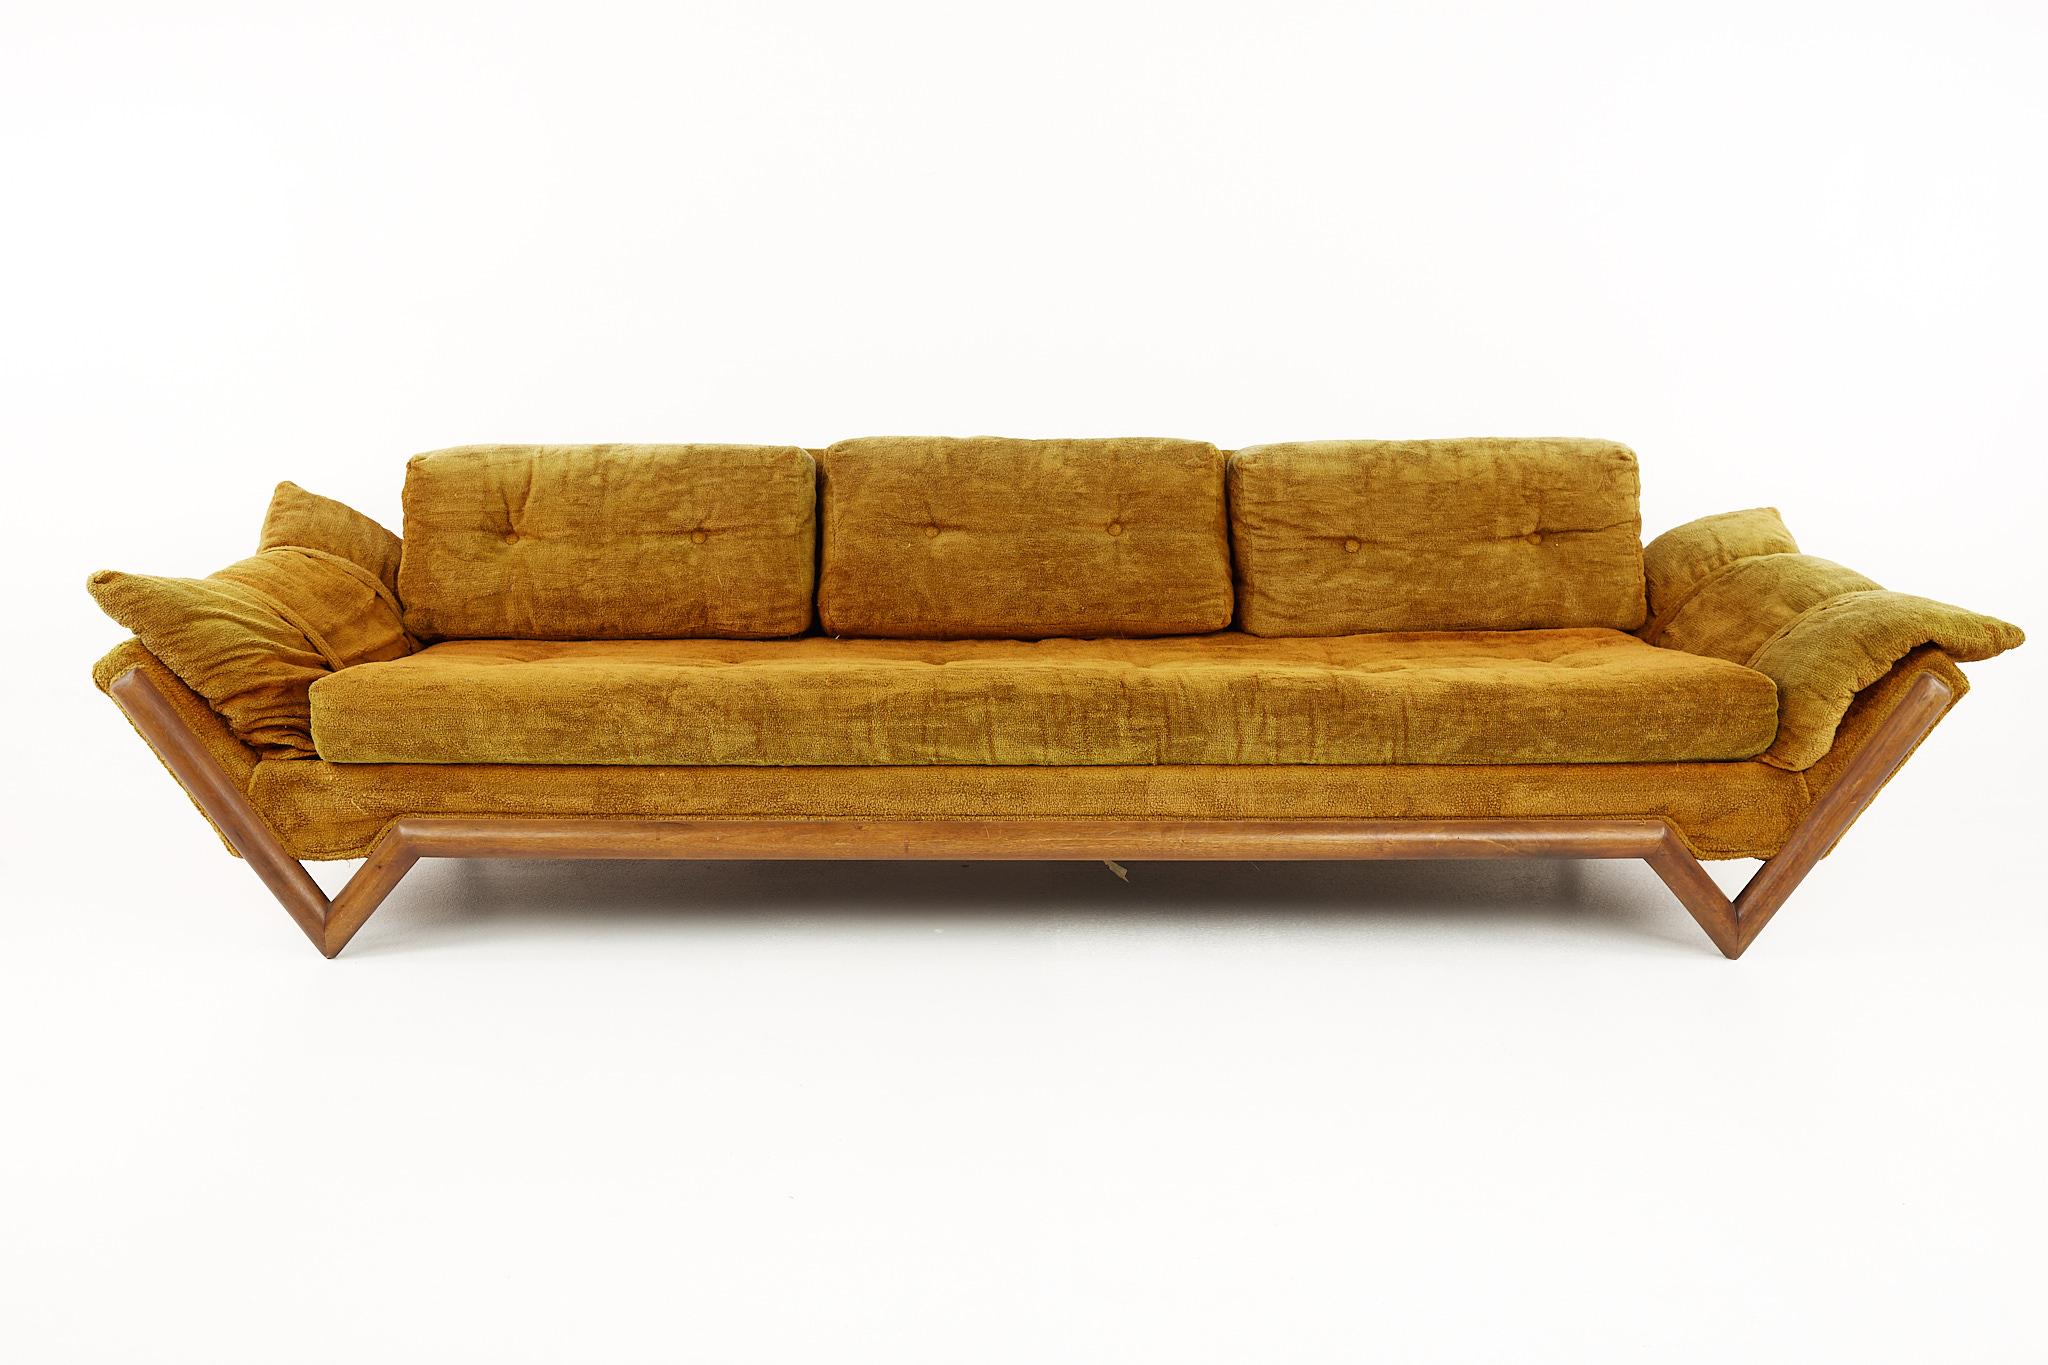 Adrian Pearsall for Craft Associates 3780 mid century sofa

The sofa measures: 98 wide x 37 deep x 26 high, with a seat height of 15 inches and an arm height of 20 inches

All pieces of furniture can be had in what we call restored vintage